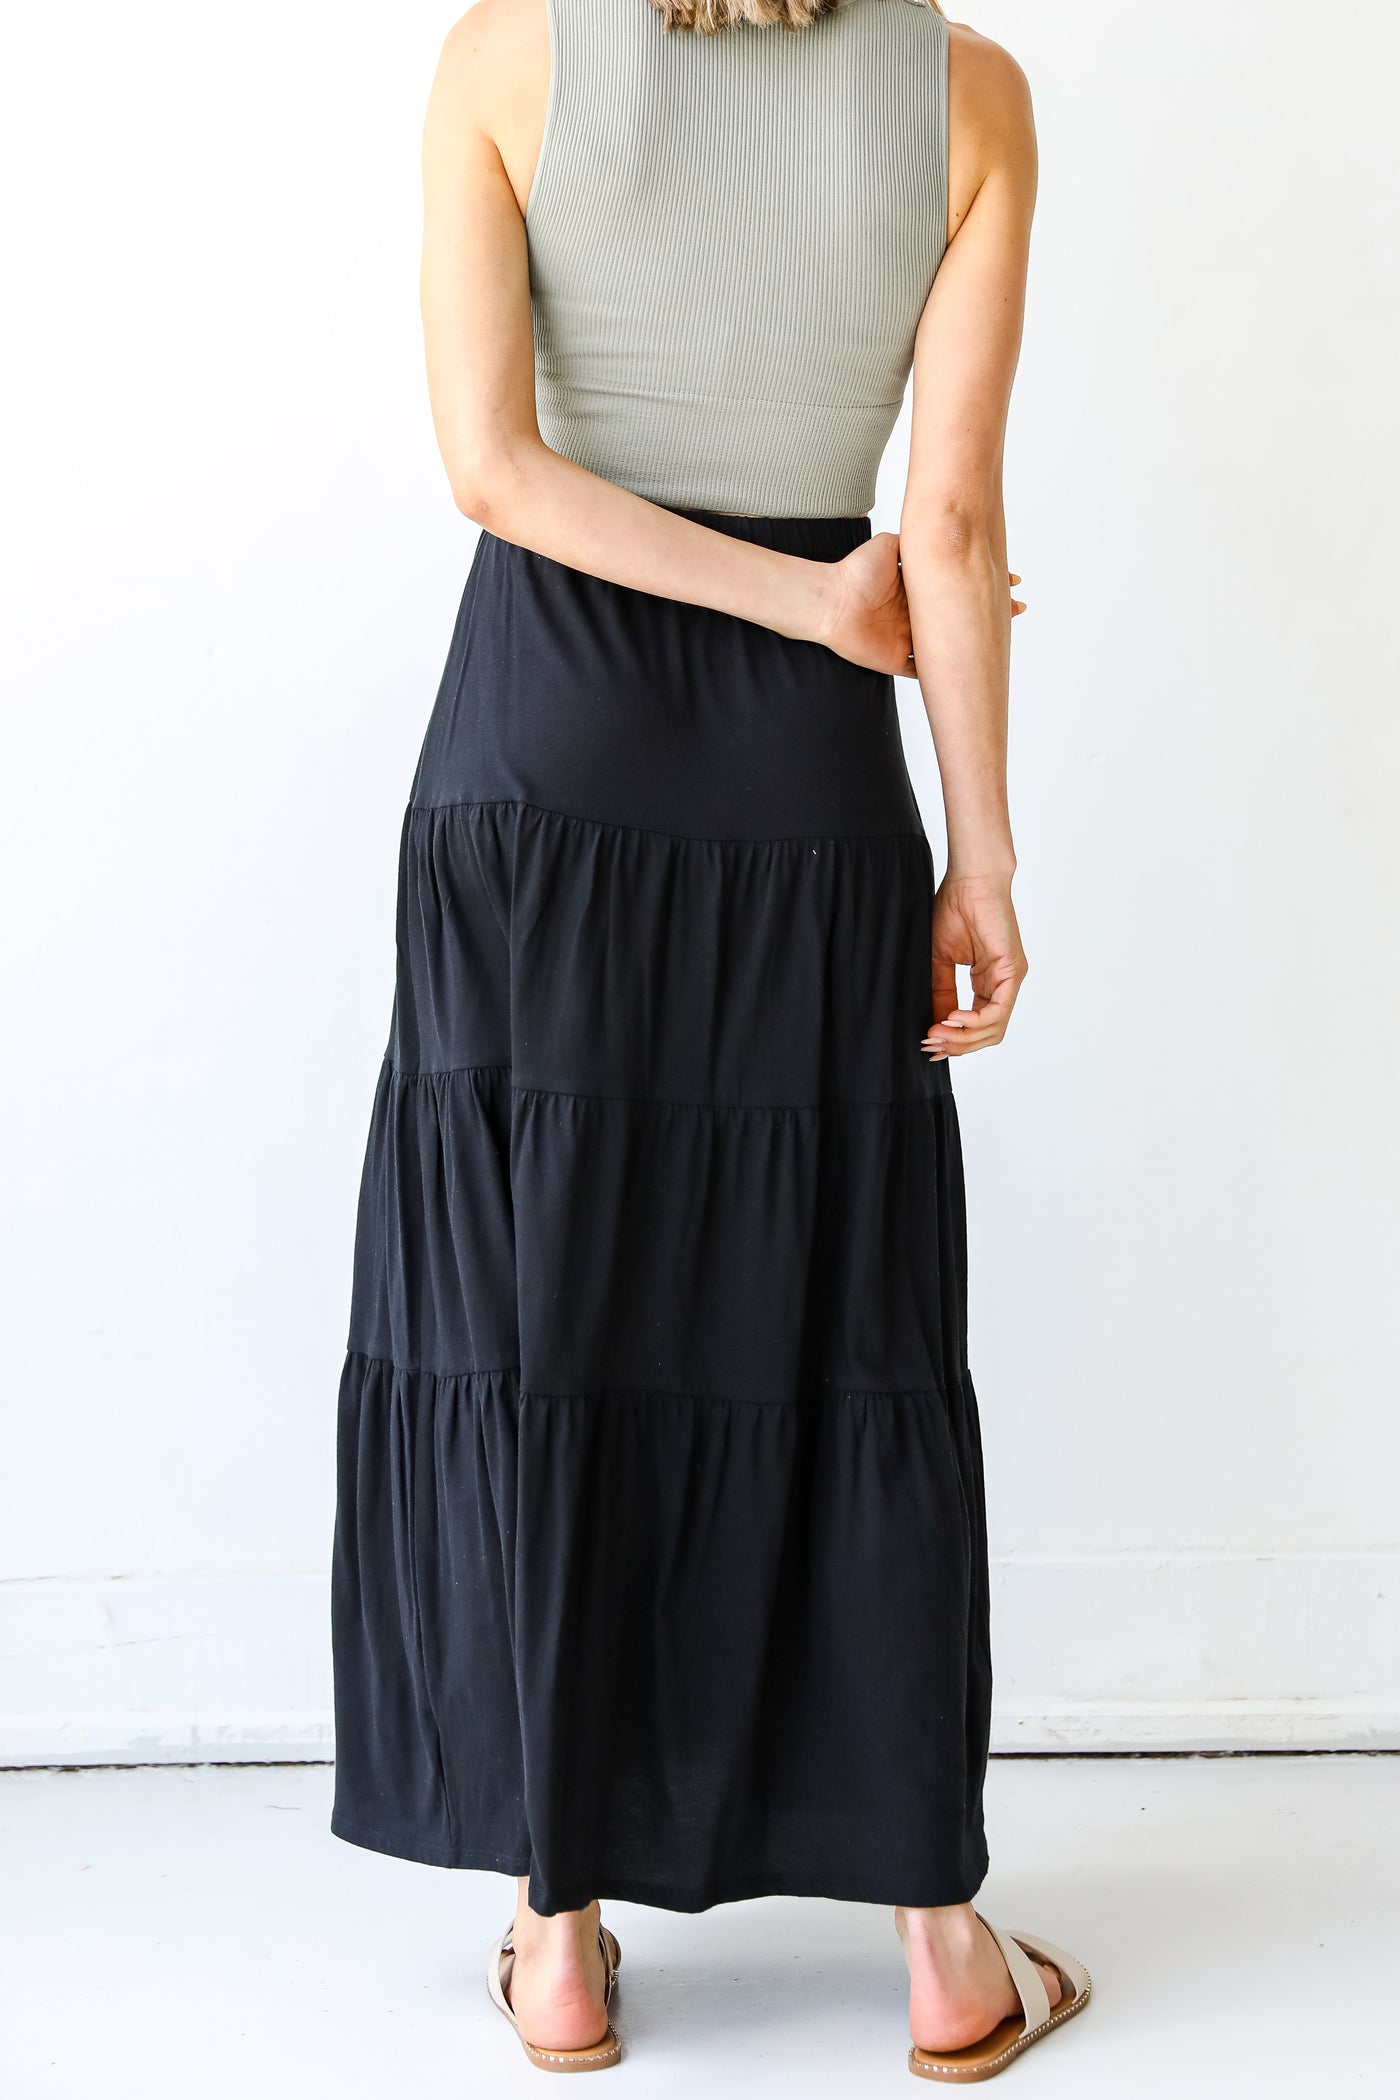 Tiered Maxi Skirt in black back view